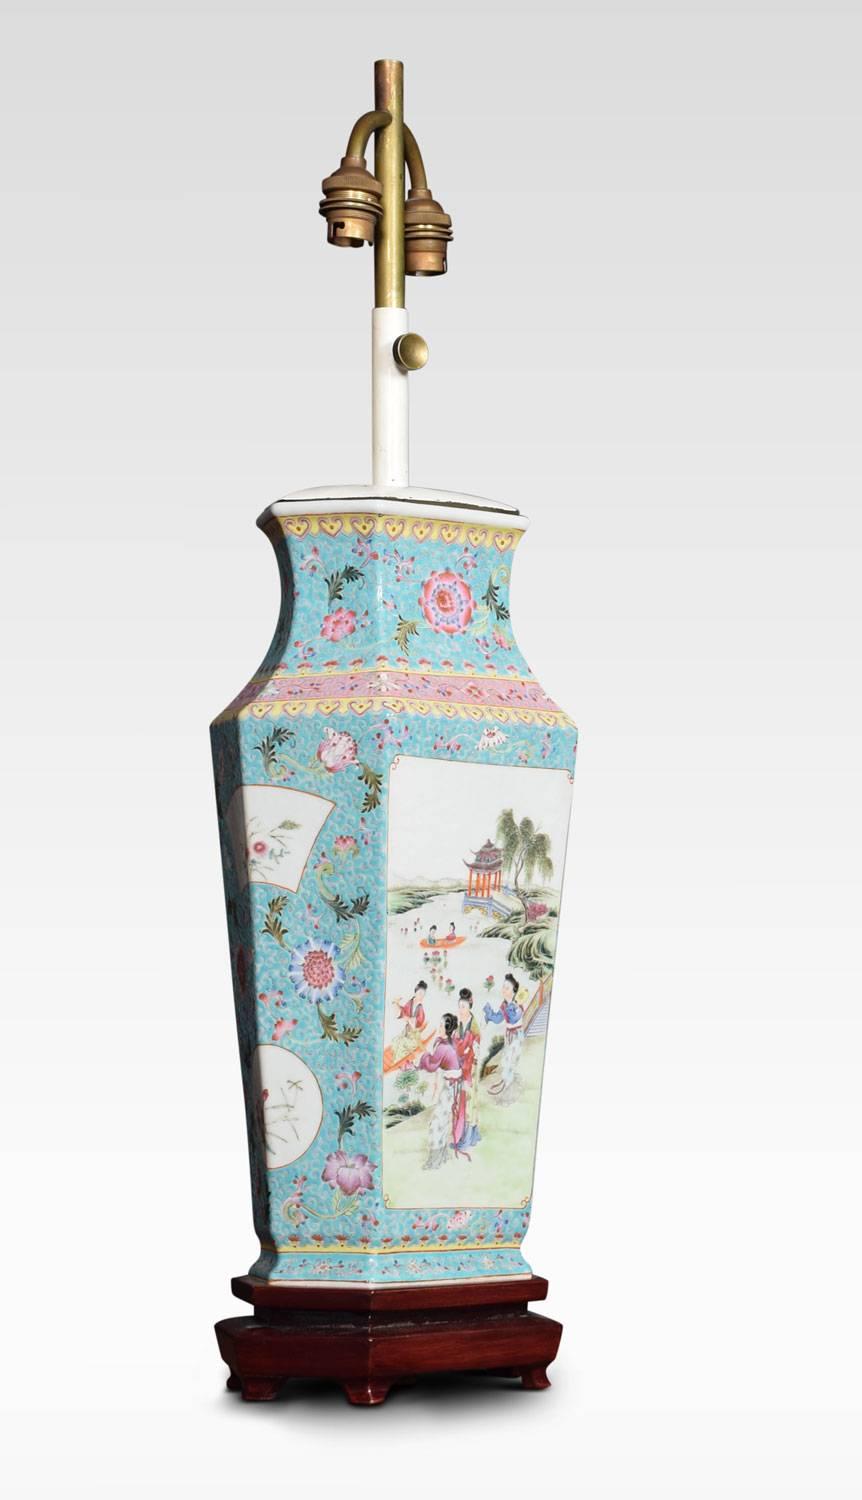 Famille rose Canton porcelain vase lamp, with adjustable stem above. The vase painted with reserves of traditional figures and flower heads within foliate and decorated borders. All raised up on Chinese rosewood base.
Dimensions:

Measures: total